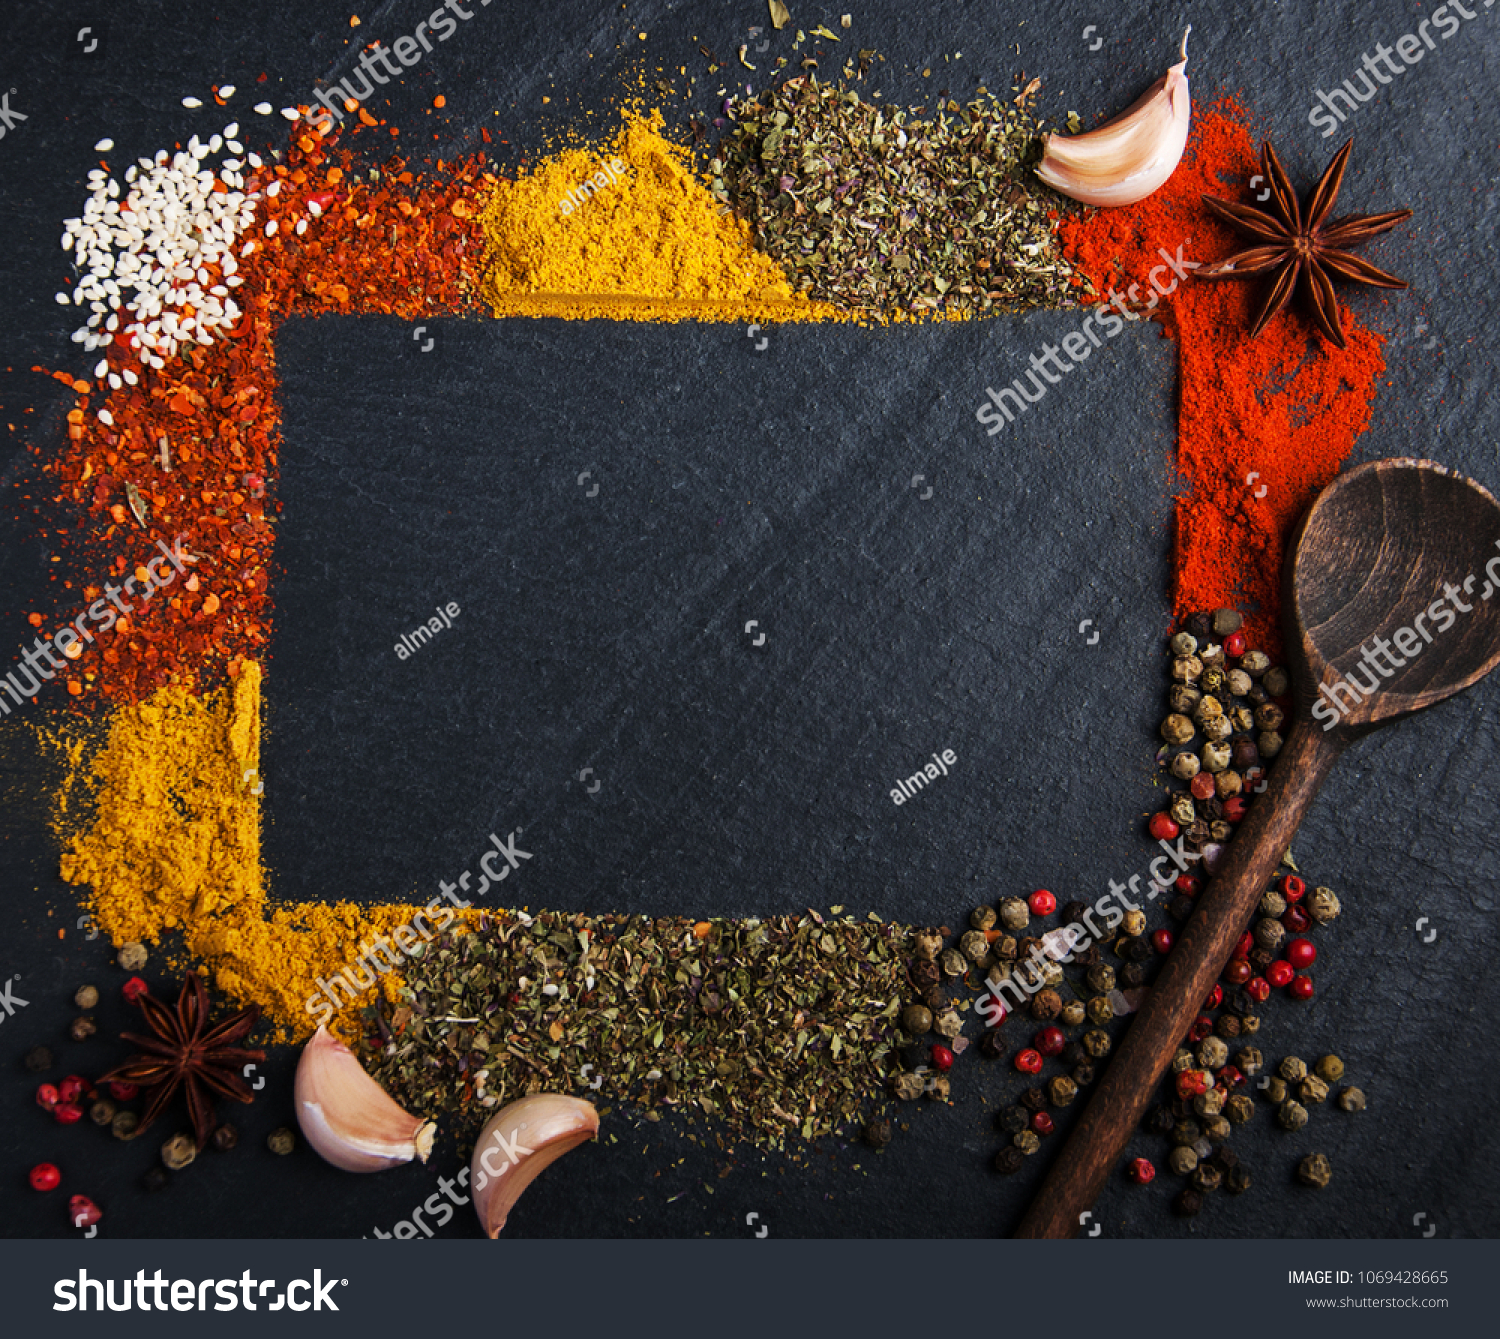 Different kind of spices on a black stone background #1069428665